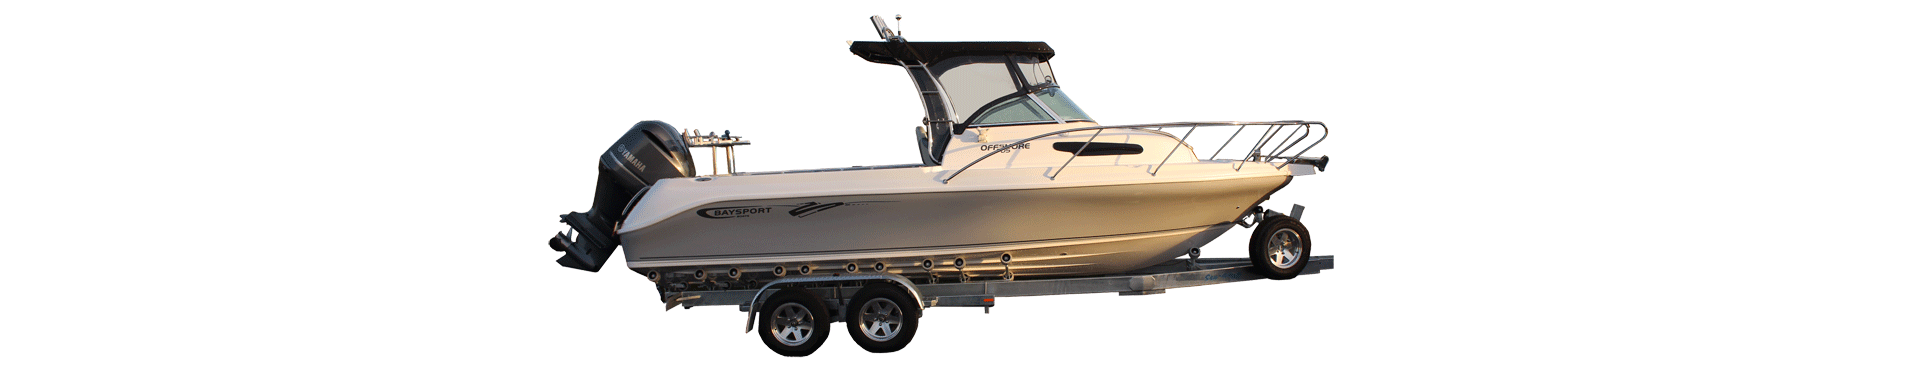 Baysport Boats 705 Offshore